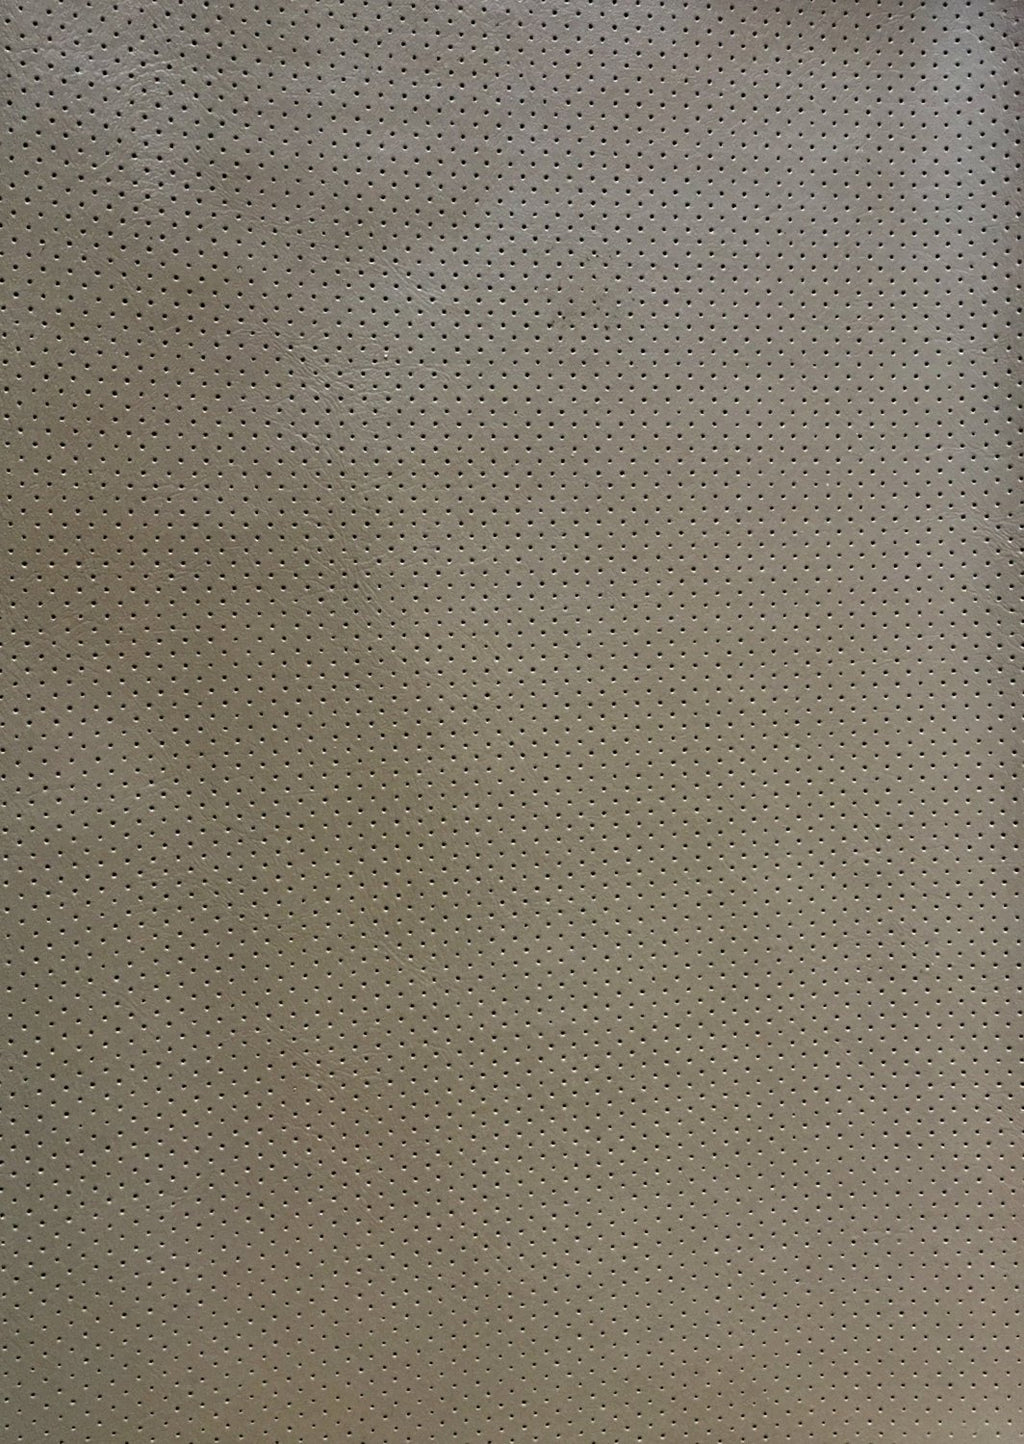 Sand Dollar Cream Beige Taupe Perforated Vinyl Perforated Upholstery Fabric  by the Yard E2419